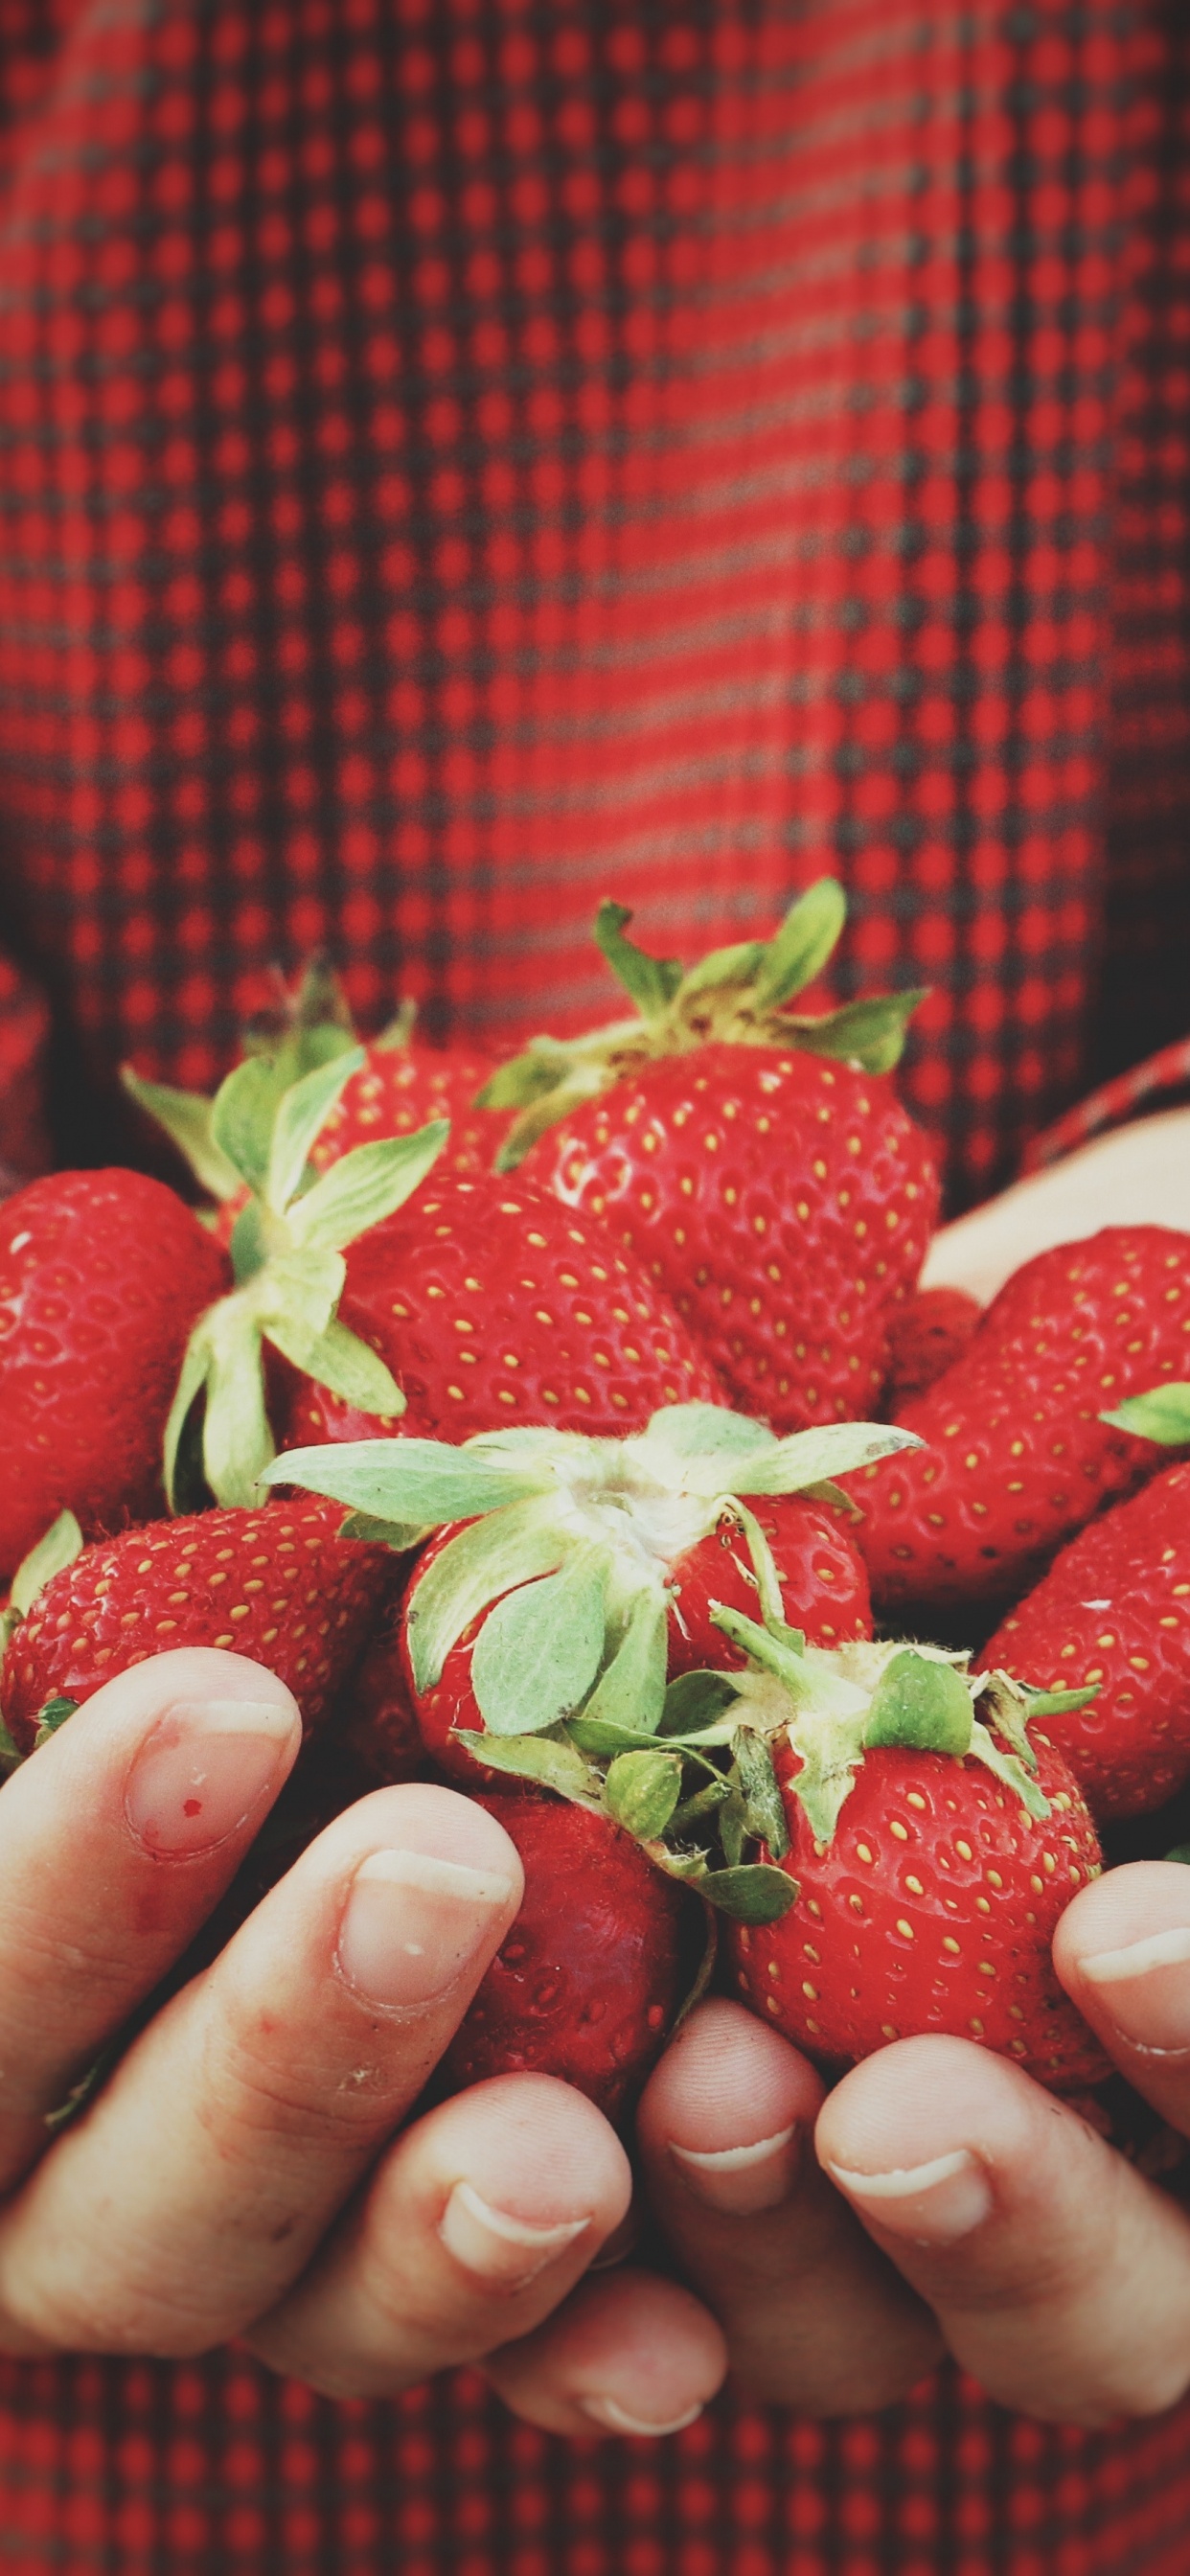 Person Holding Strawberries on Hand. Wallpaper in 1242x2688 Resolution